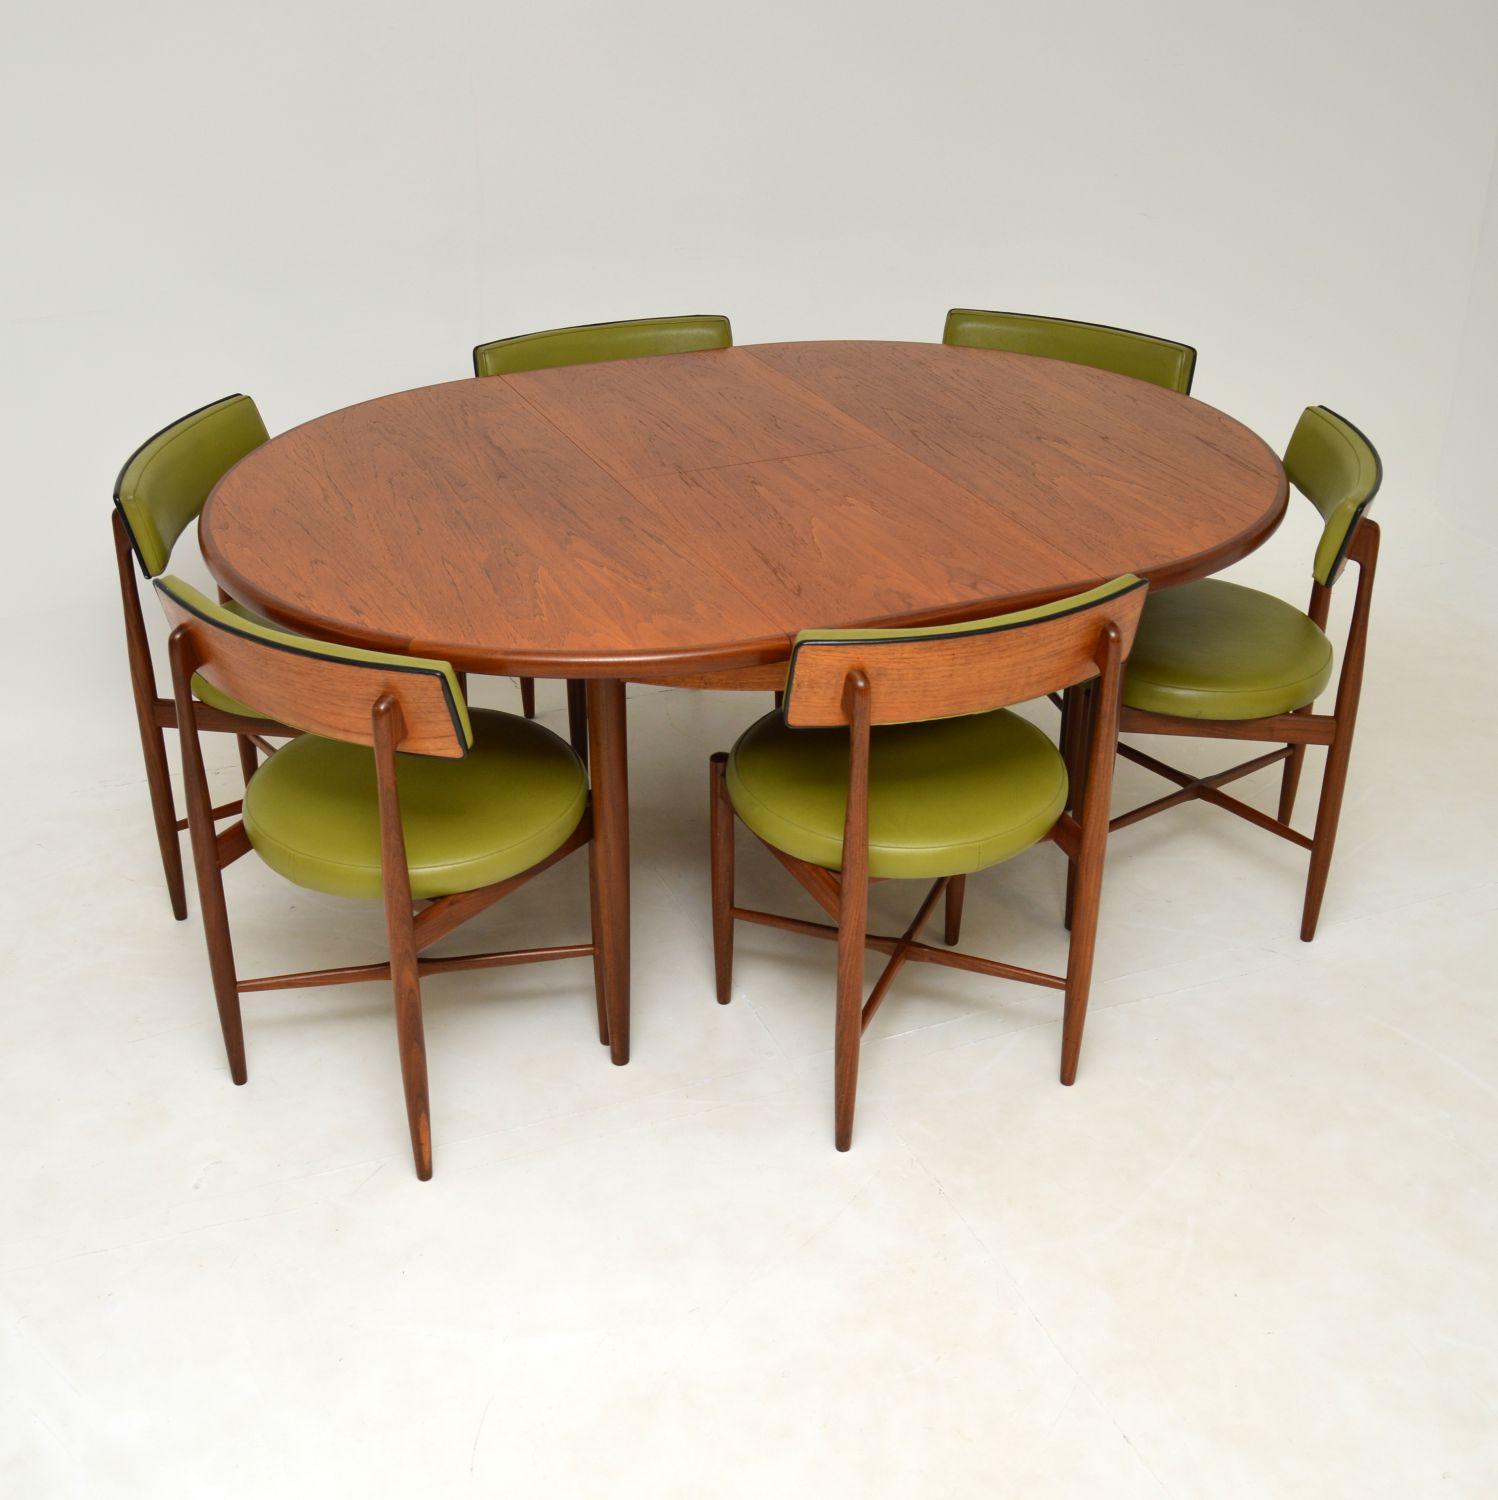 A stunning and iconic vintage teak dining table and chair set. This was part of the Fresco range made in England by G Plan, it dates from the 1960-70’s.

The quality is amazing, these chairs have such a beautiful design with circular seats, cross